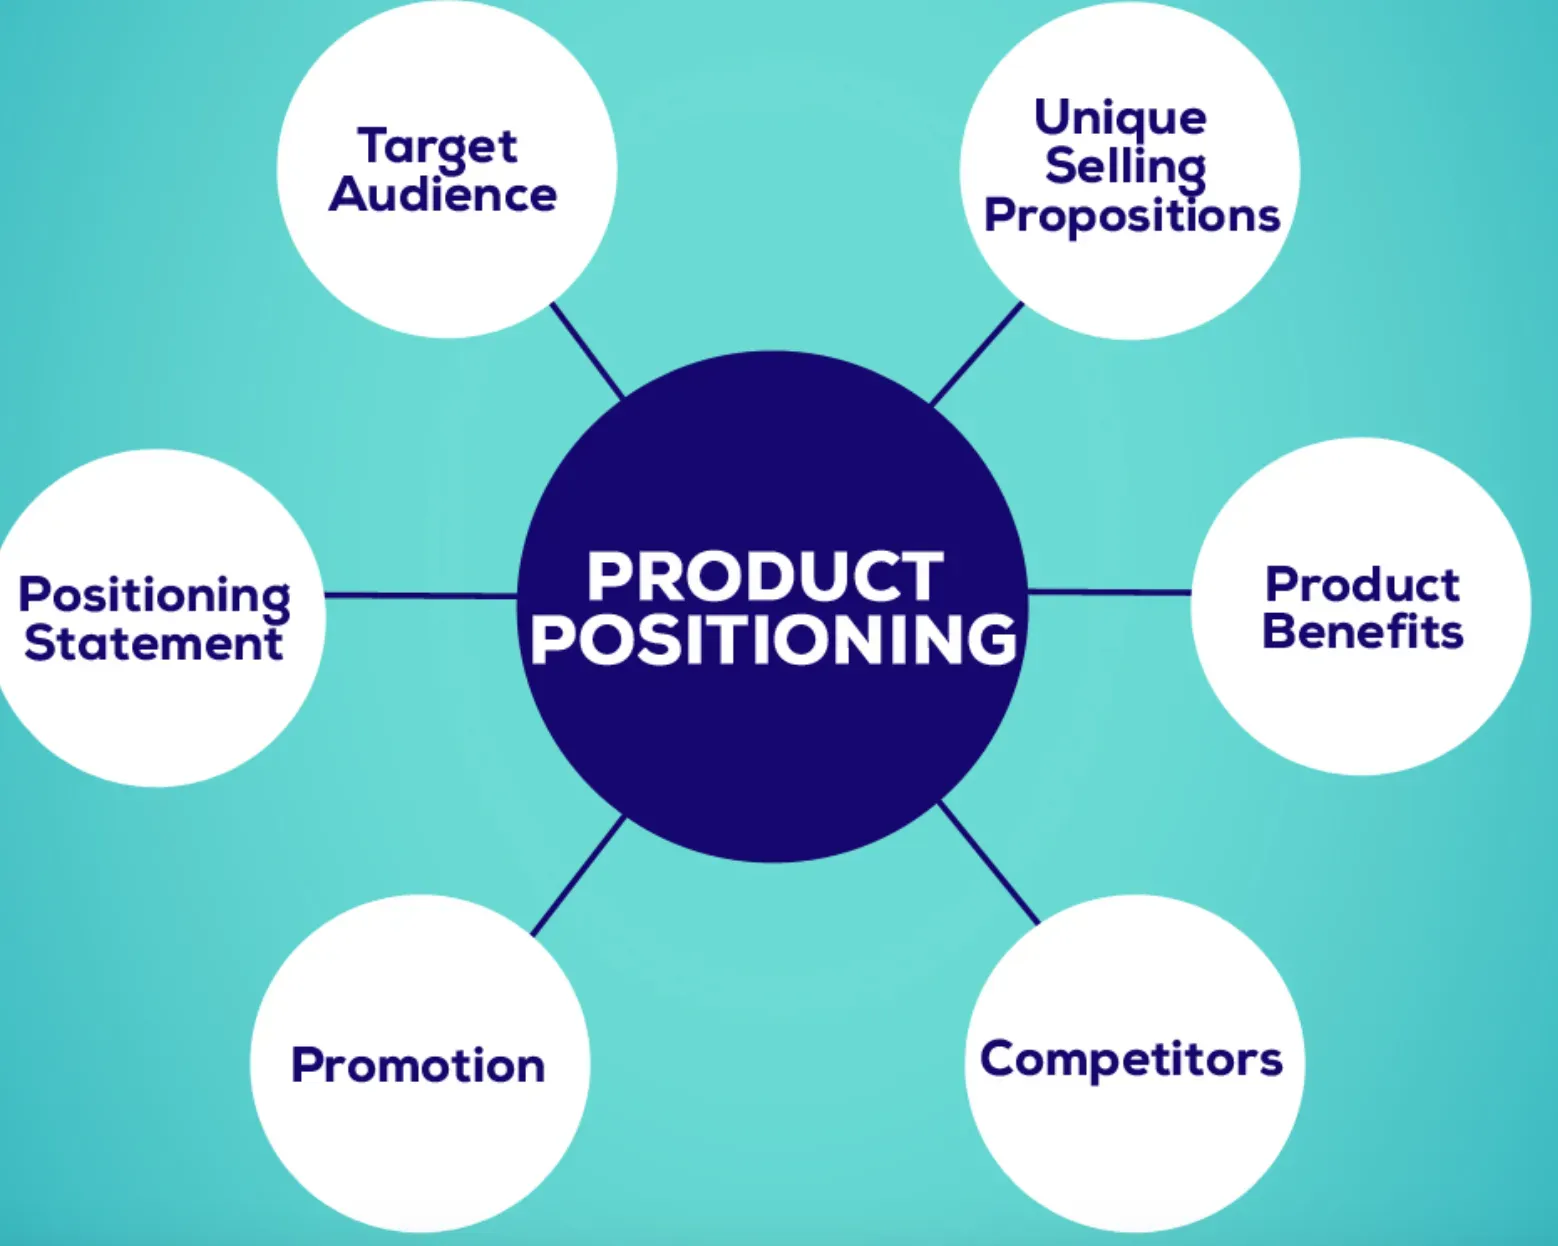 Why is Product Positioning Used?